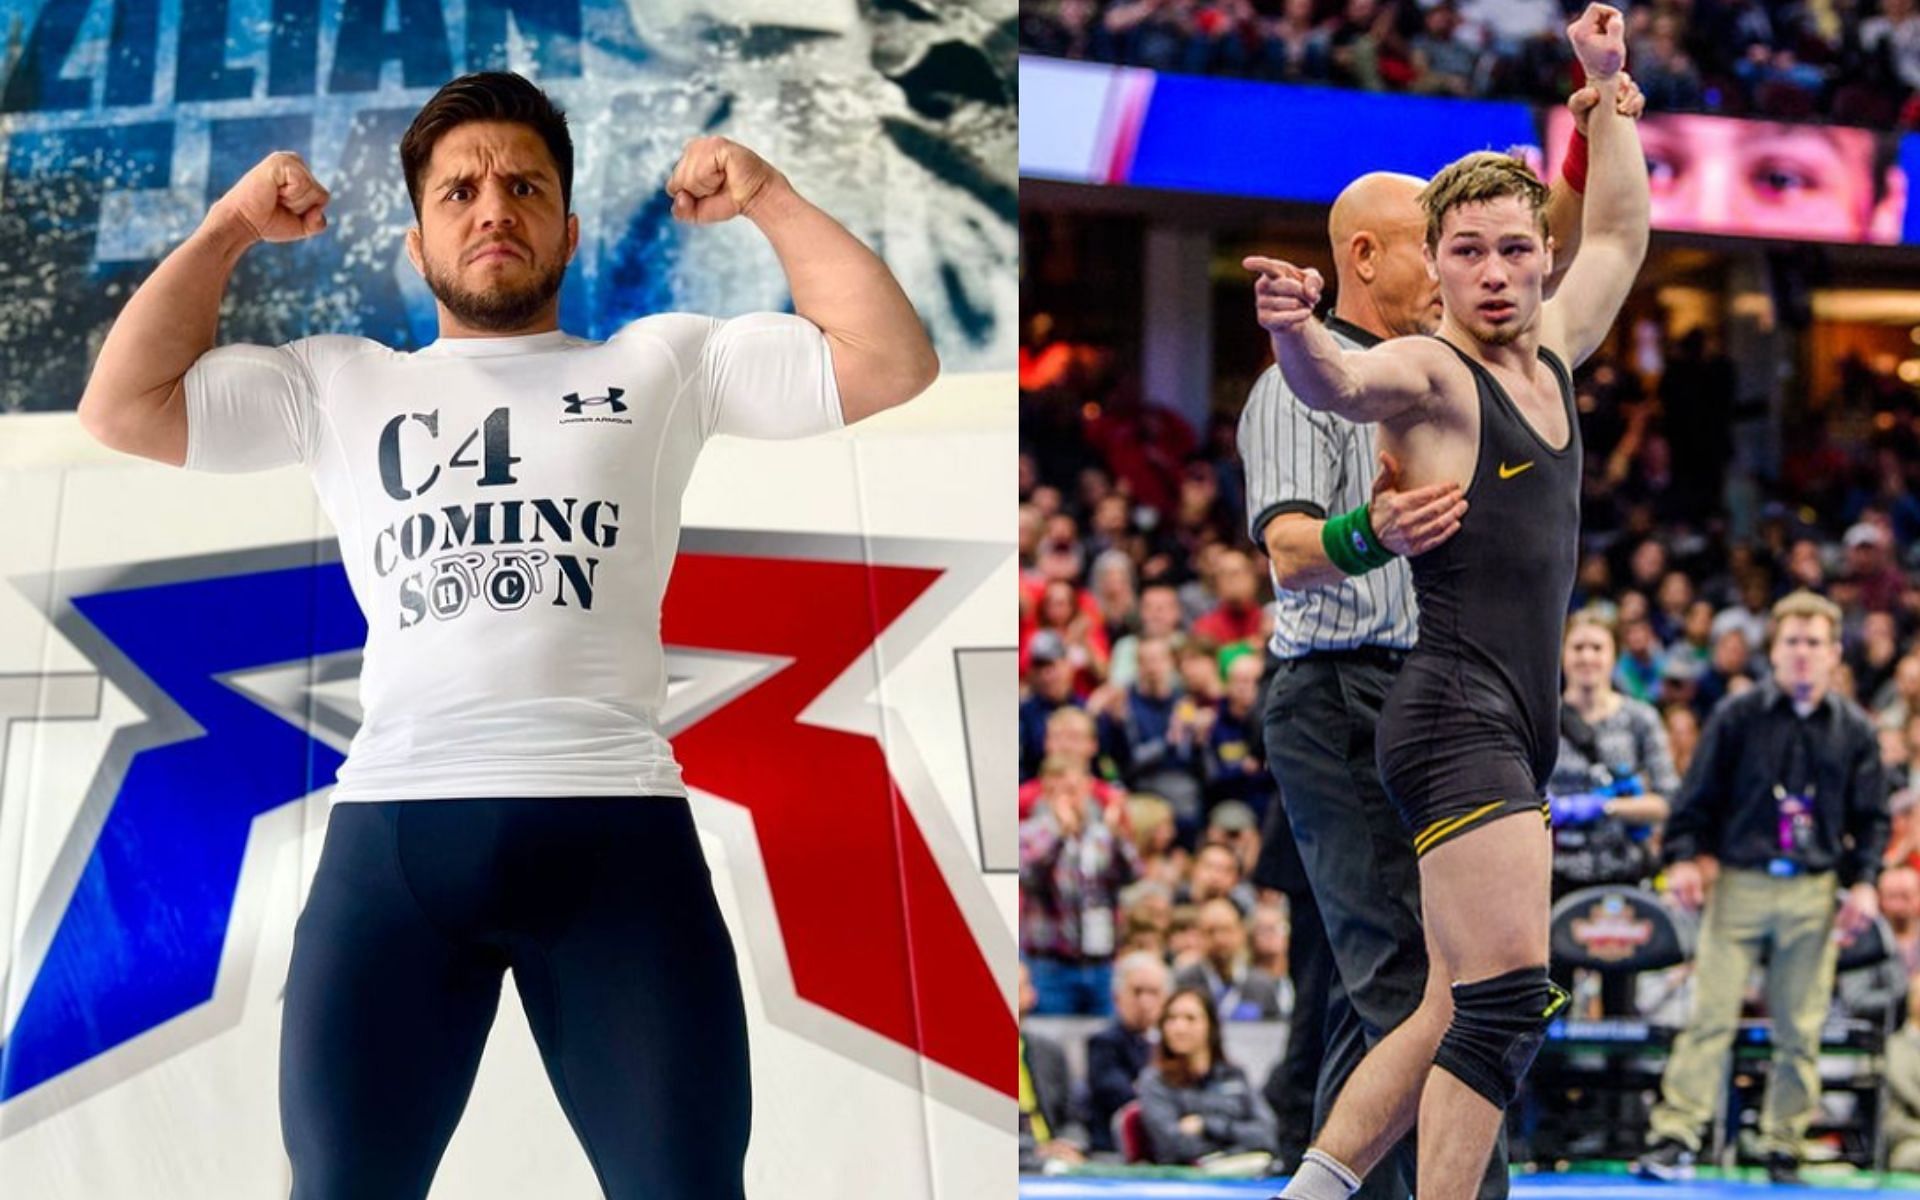 Henry Cejudo (Left) and Spencer Lee (Right) [Images via: @henry_cejudo and @spencerlee365 on Instagram]